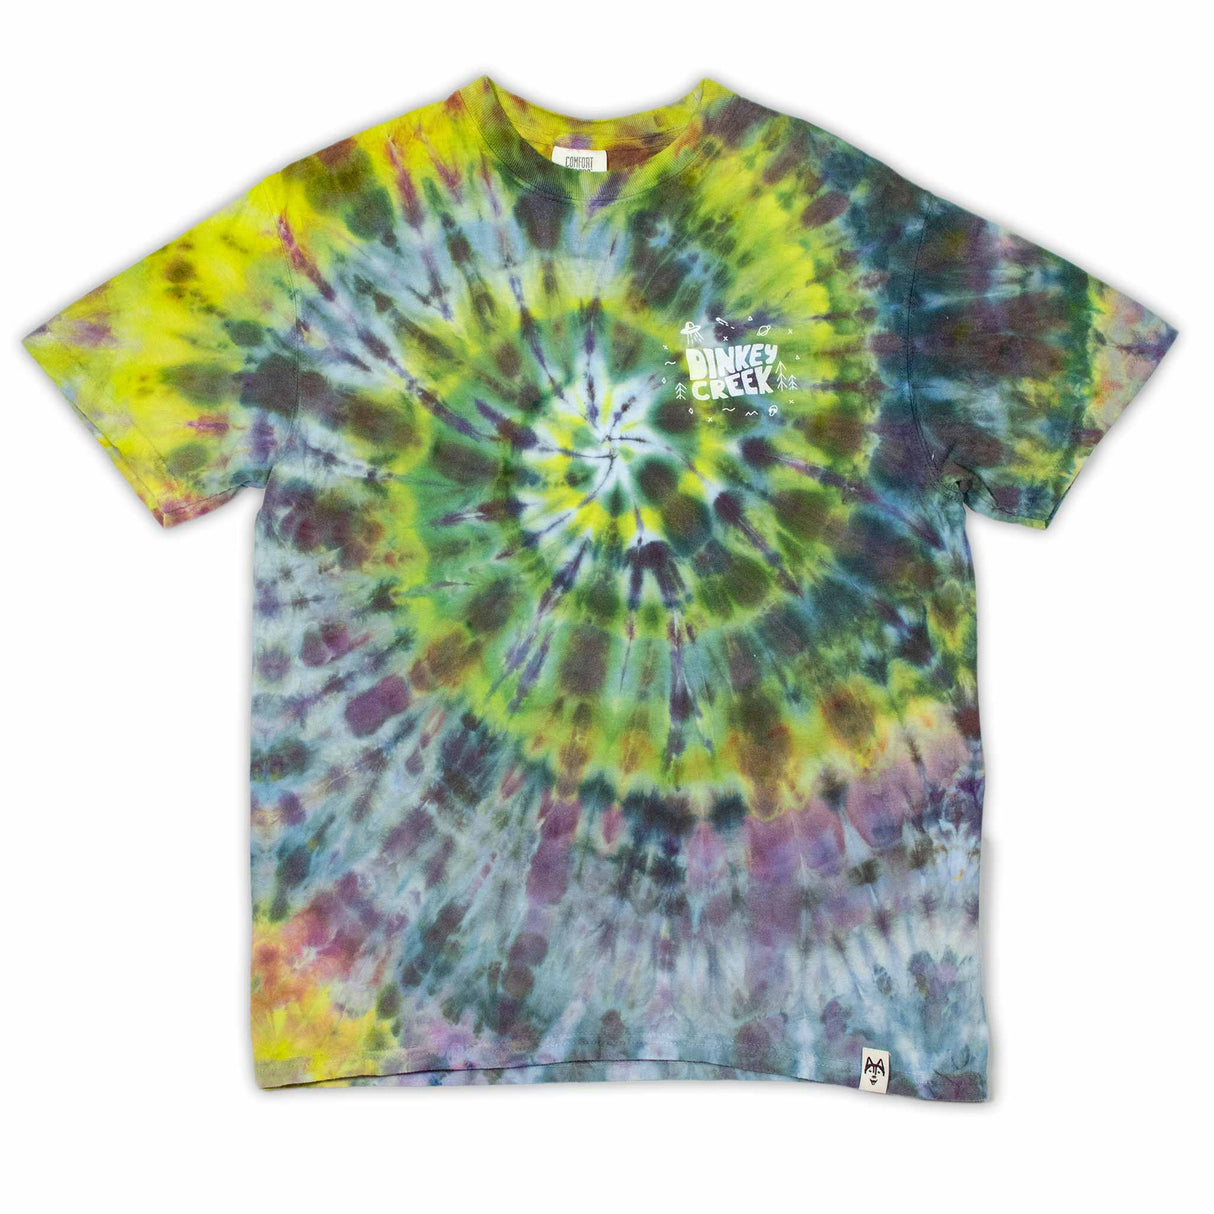 A kaleidoscope of colors forms a spiral ice dye design on this t-shirt, featuring 'Dinkey Creek' in a contrasting print, creating an eye-catching effect